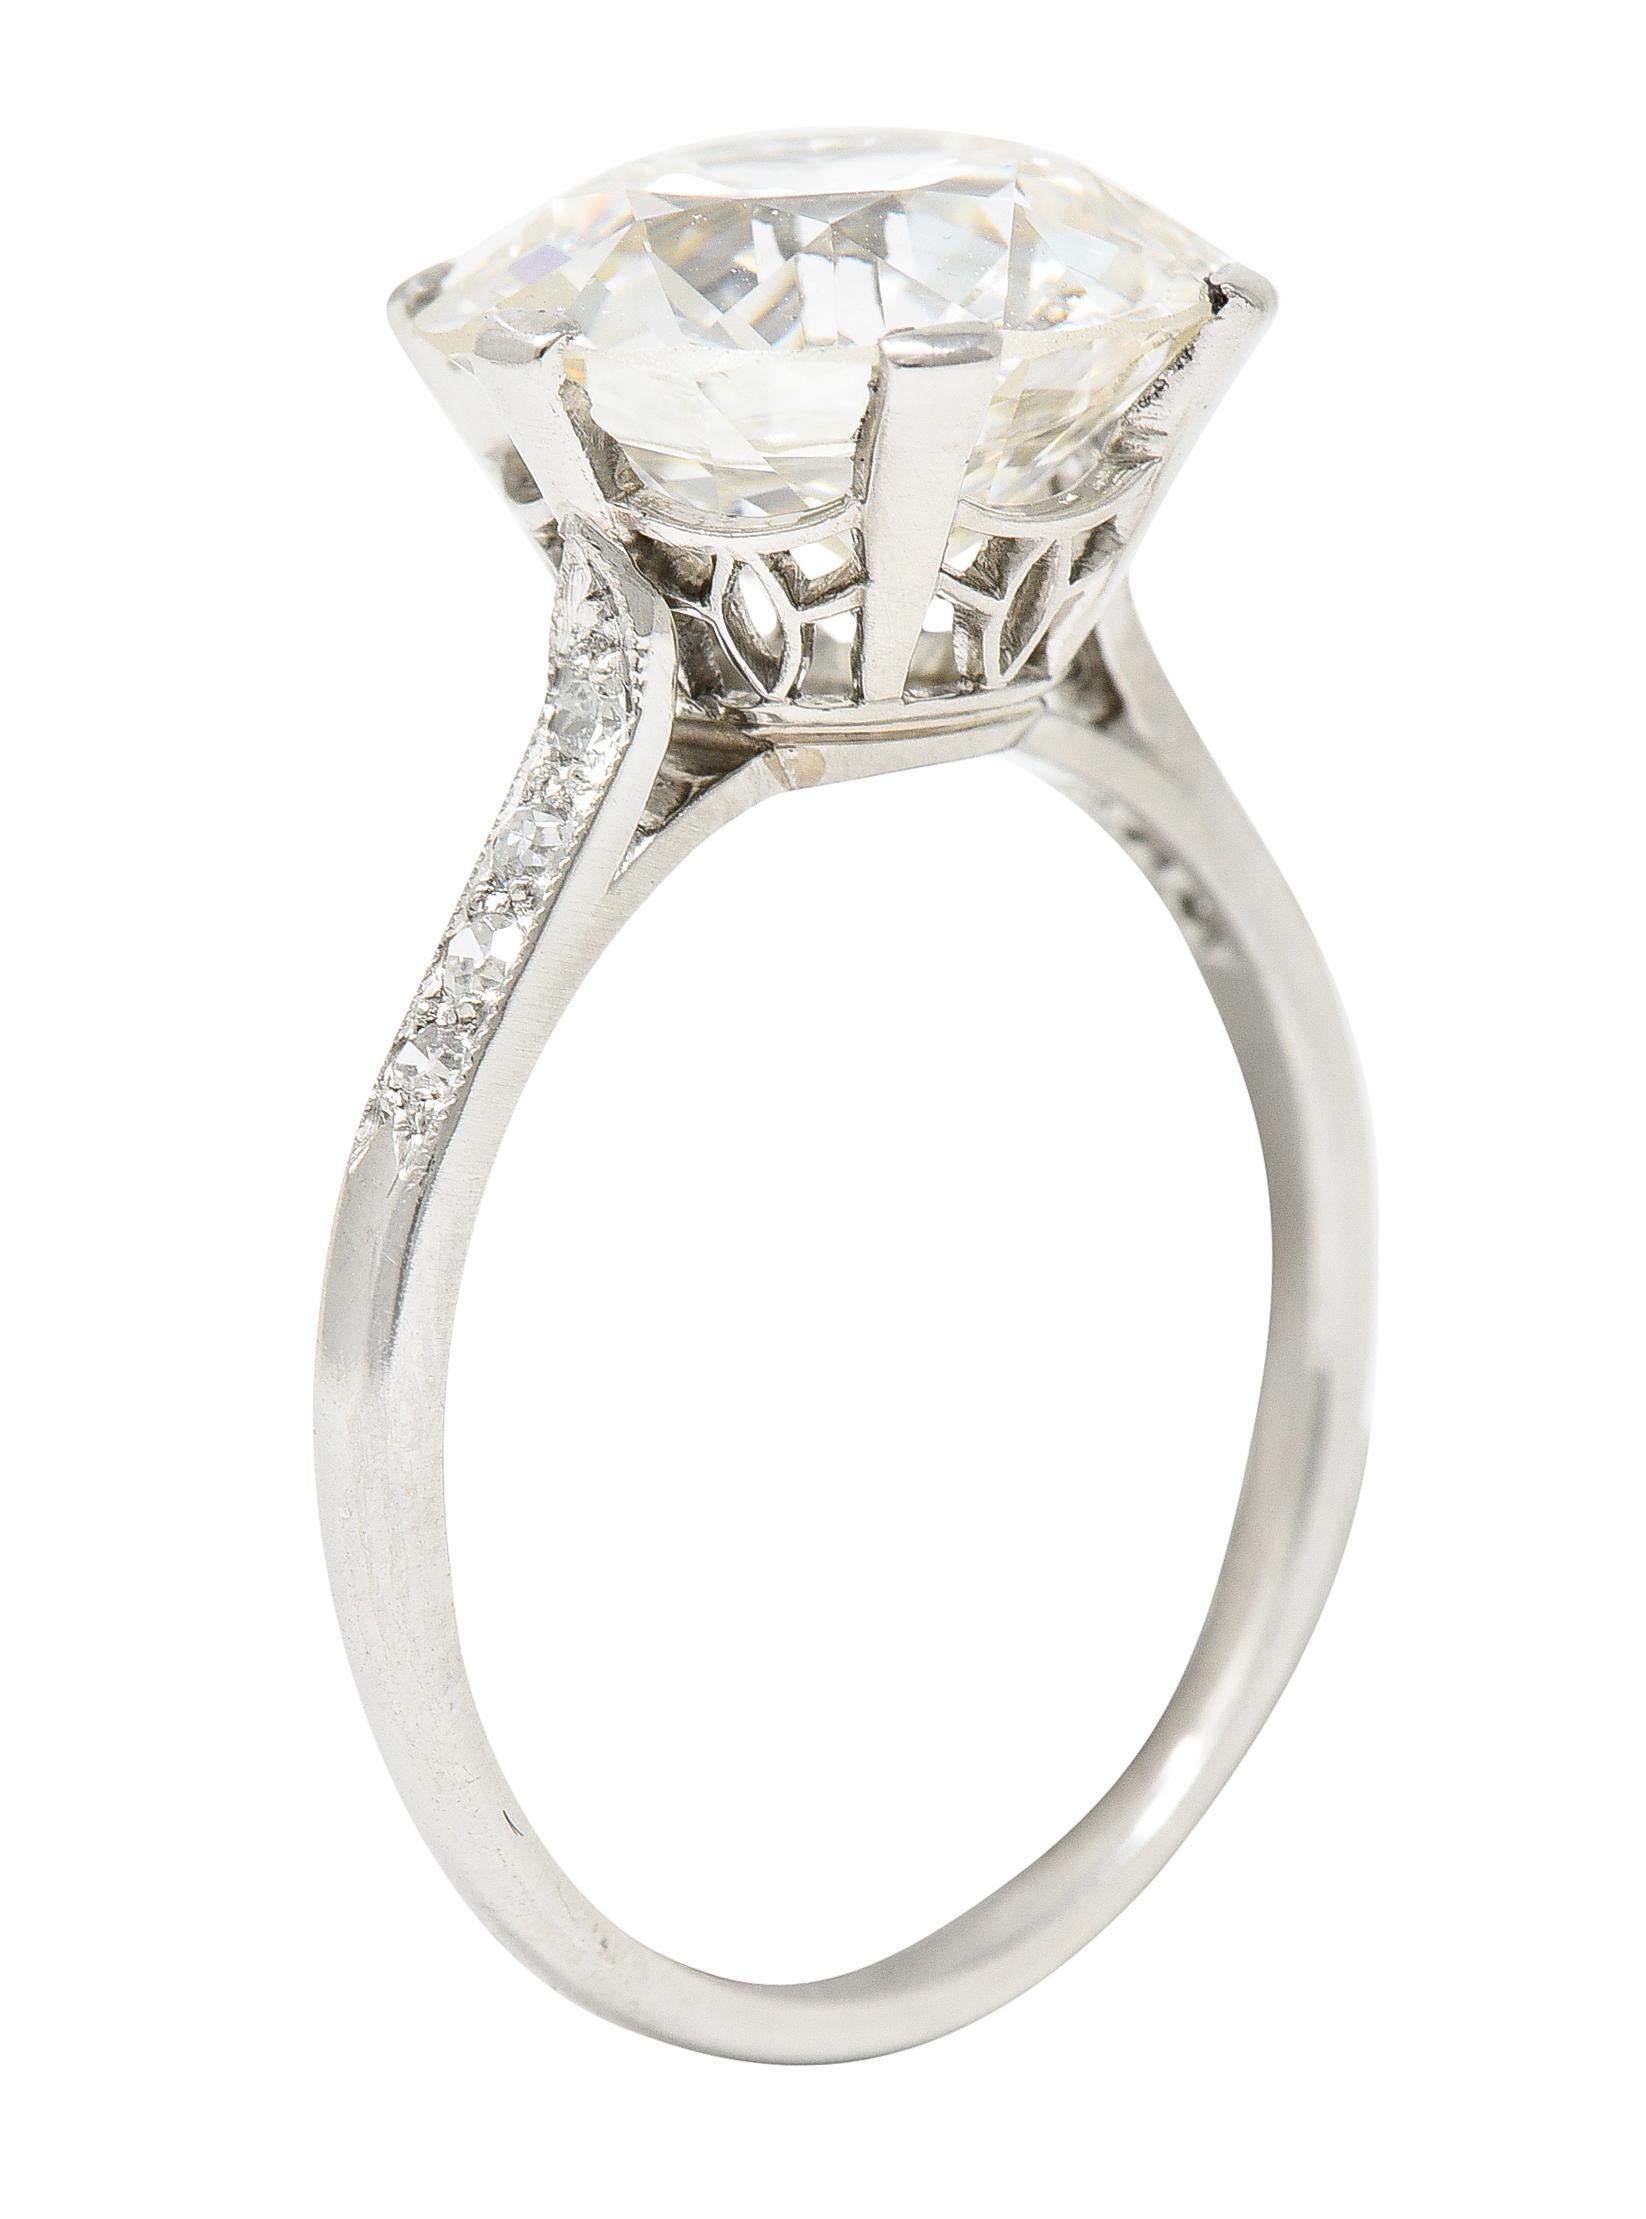 Centering an old European cut diamond weighing 4.99 carats total - J color with VS2 clarity. Set in a six prong basket - pierced with geometric foliate motif. Flanked by tapered cathedral shoulders. Bead set with single cut diamonds. Weighing